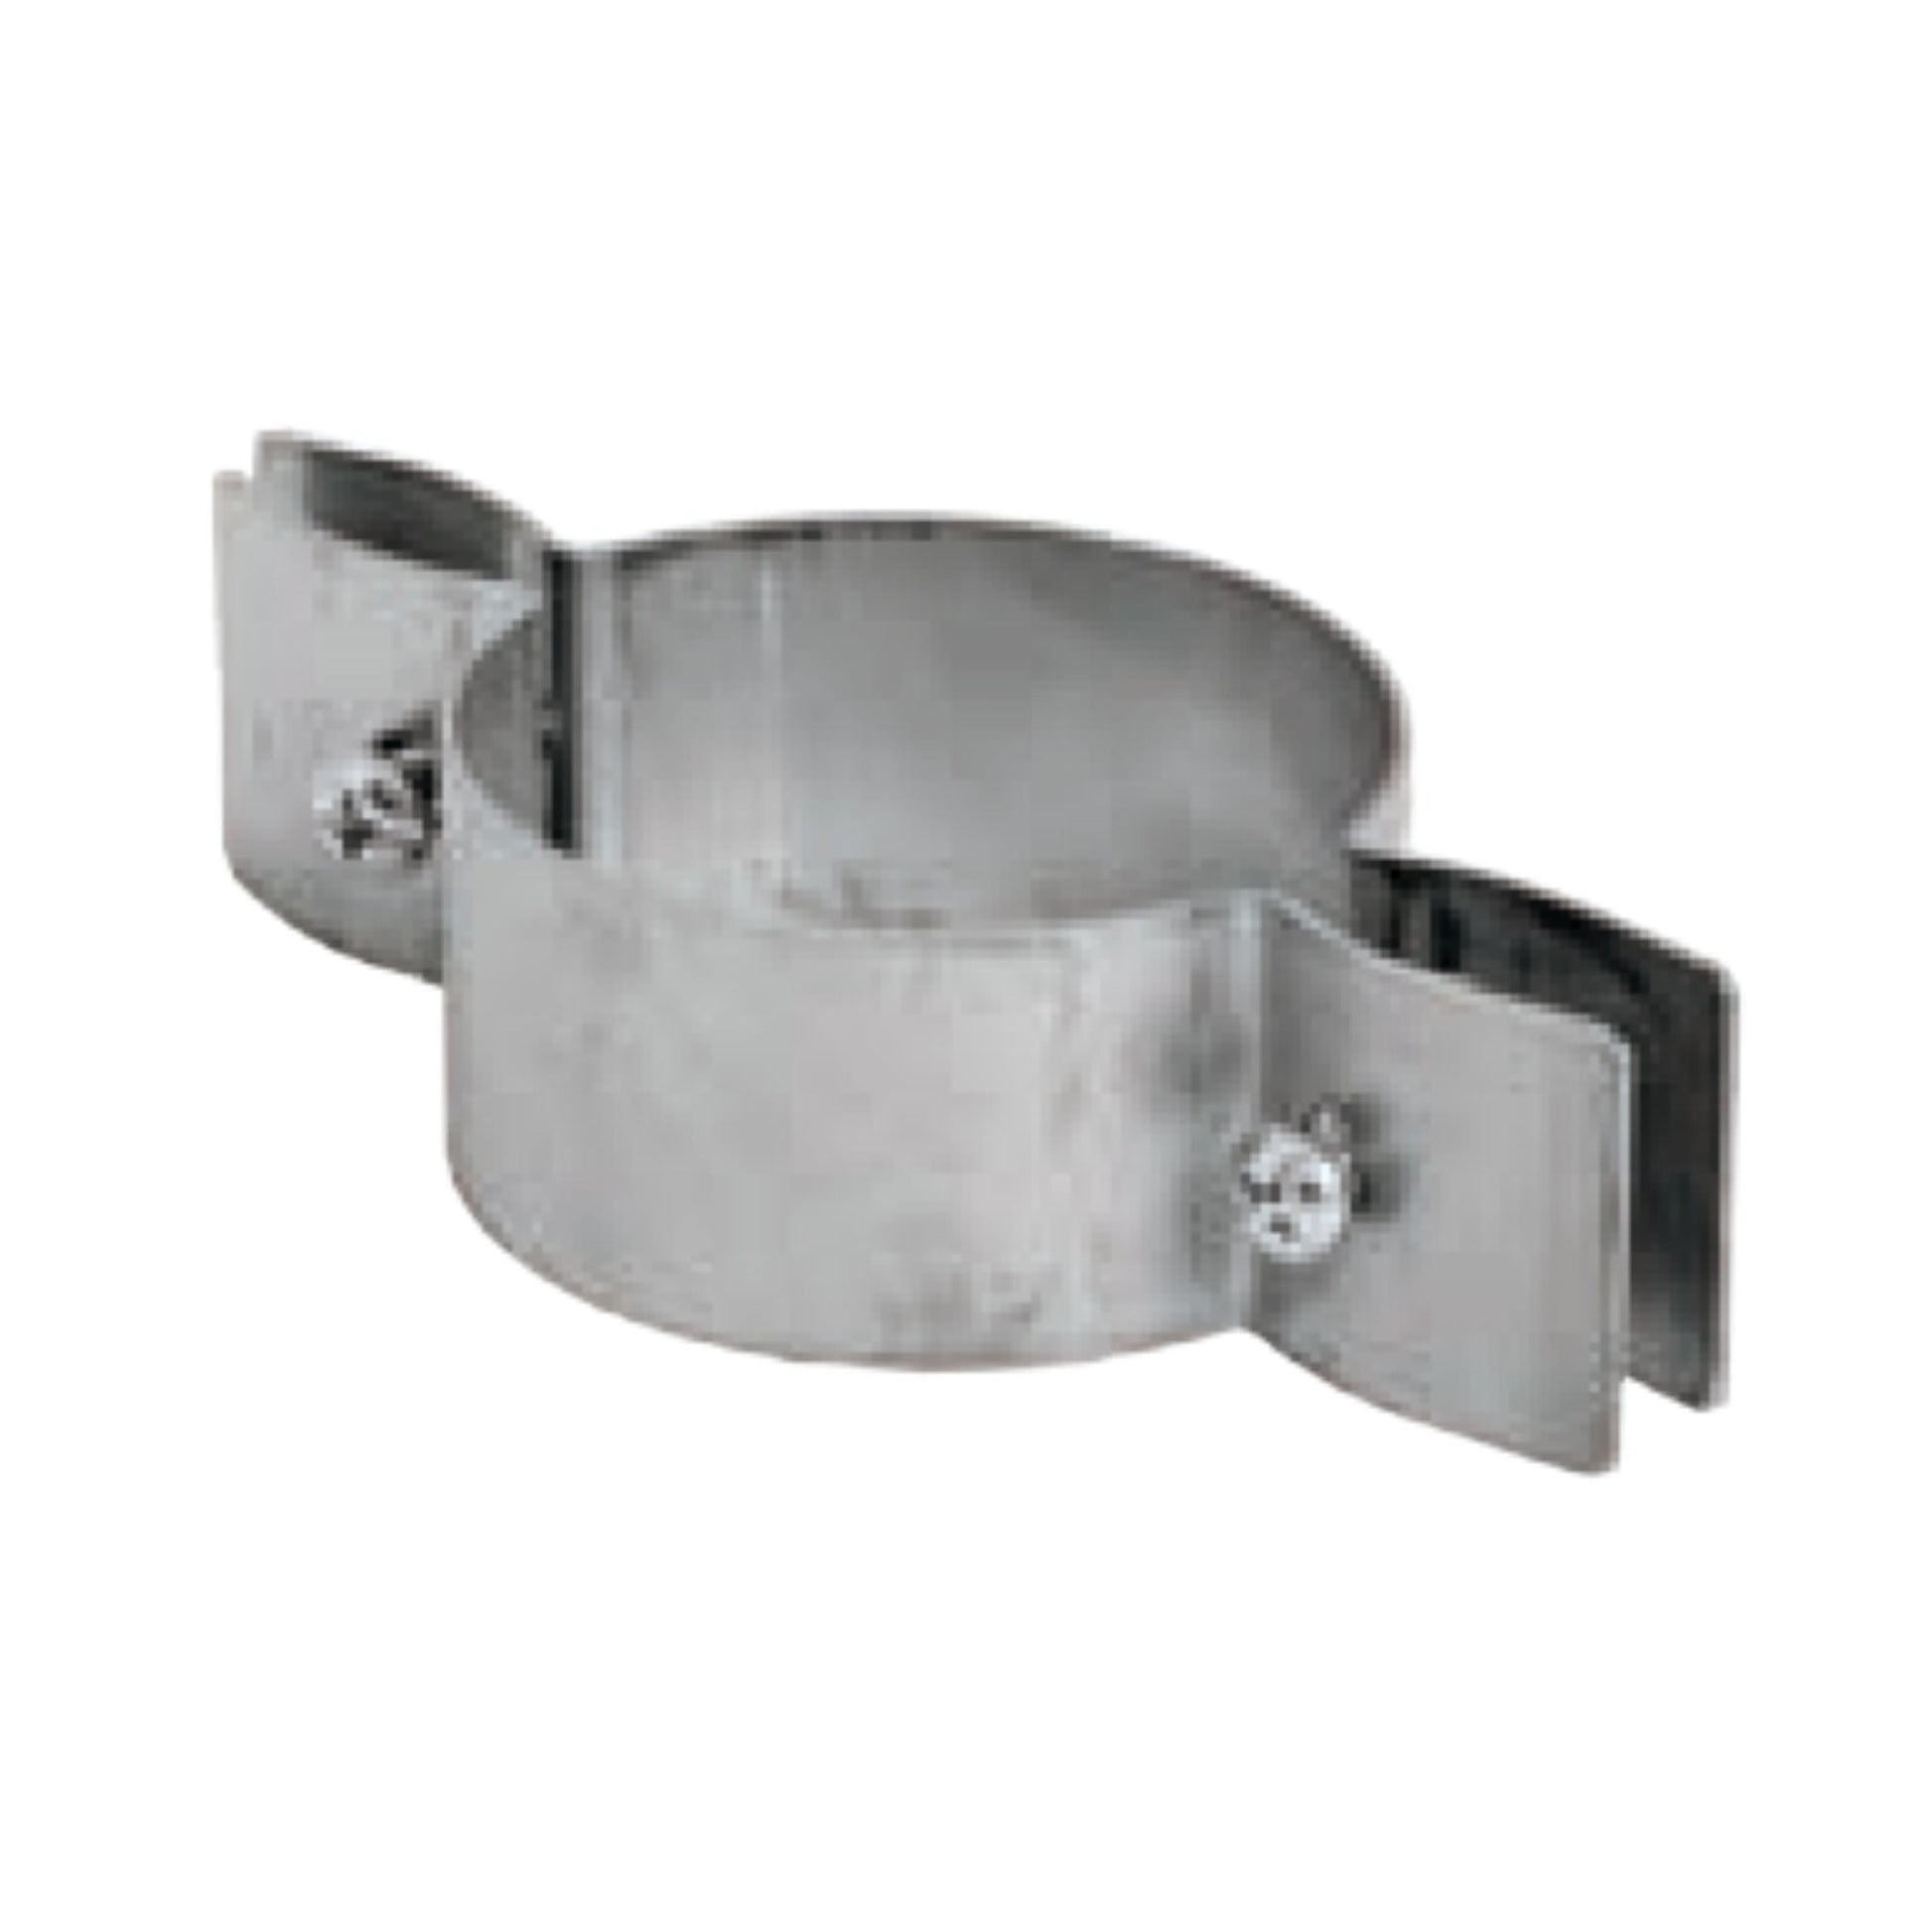 DuraVent FasNSeal 16" 29-4C Stainless Steel Support Clamp